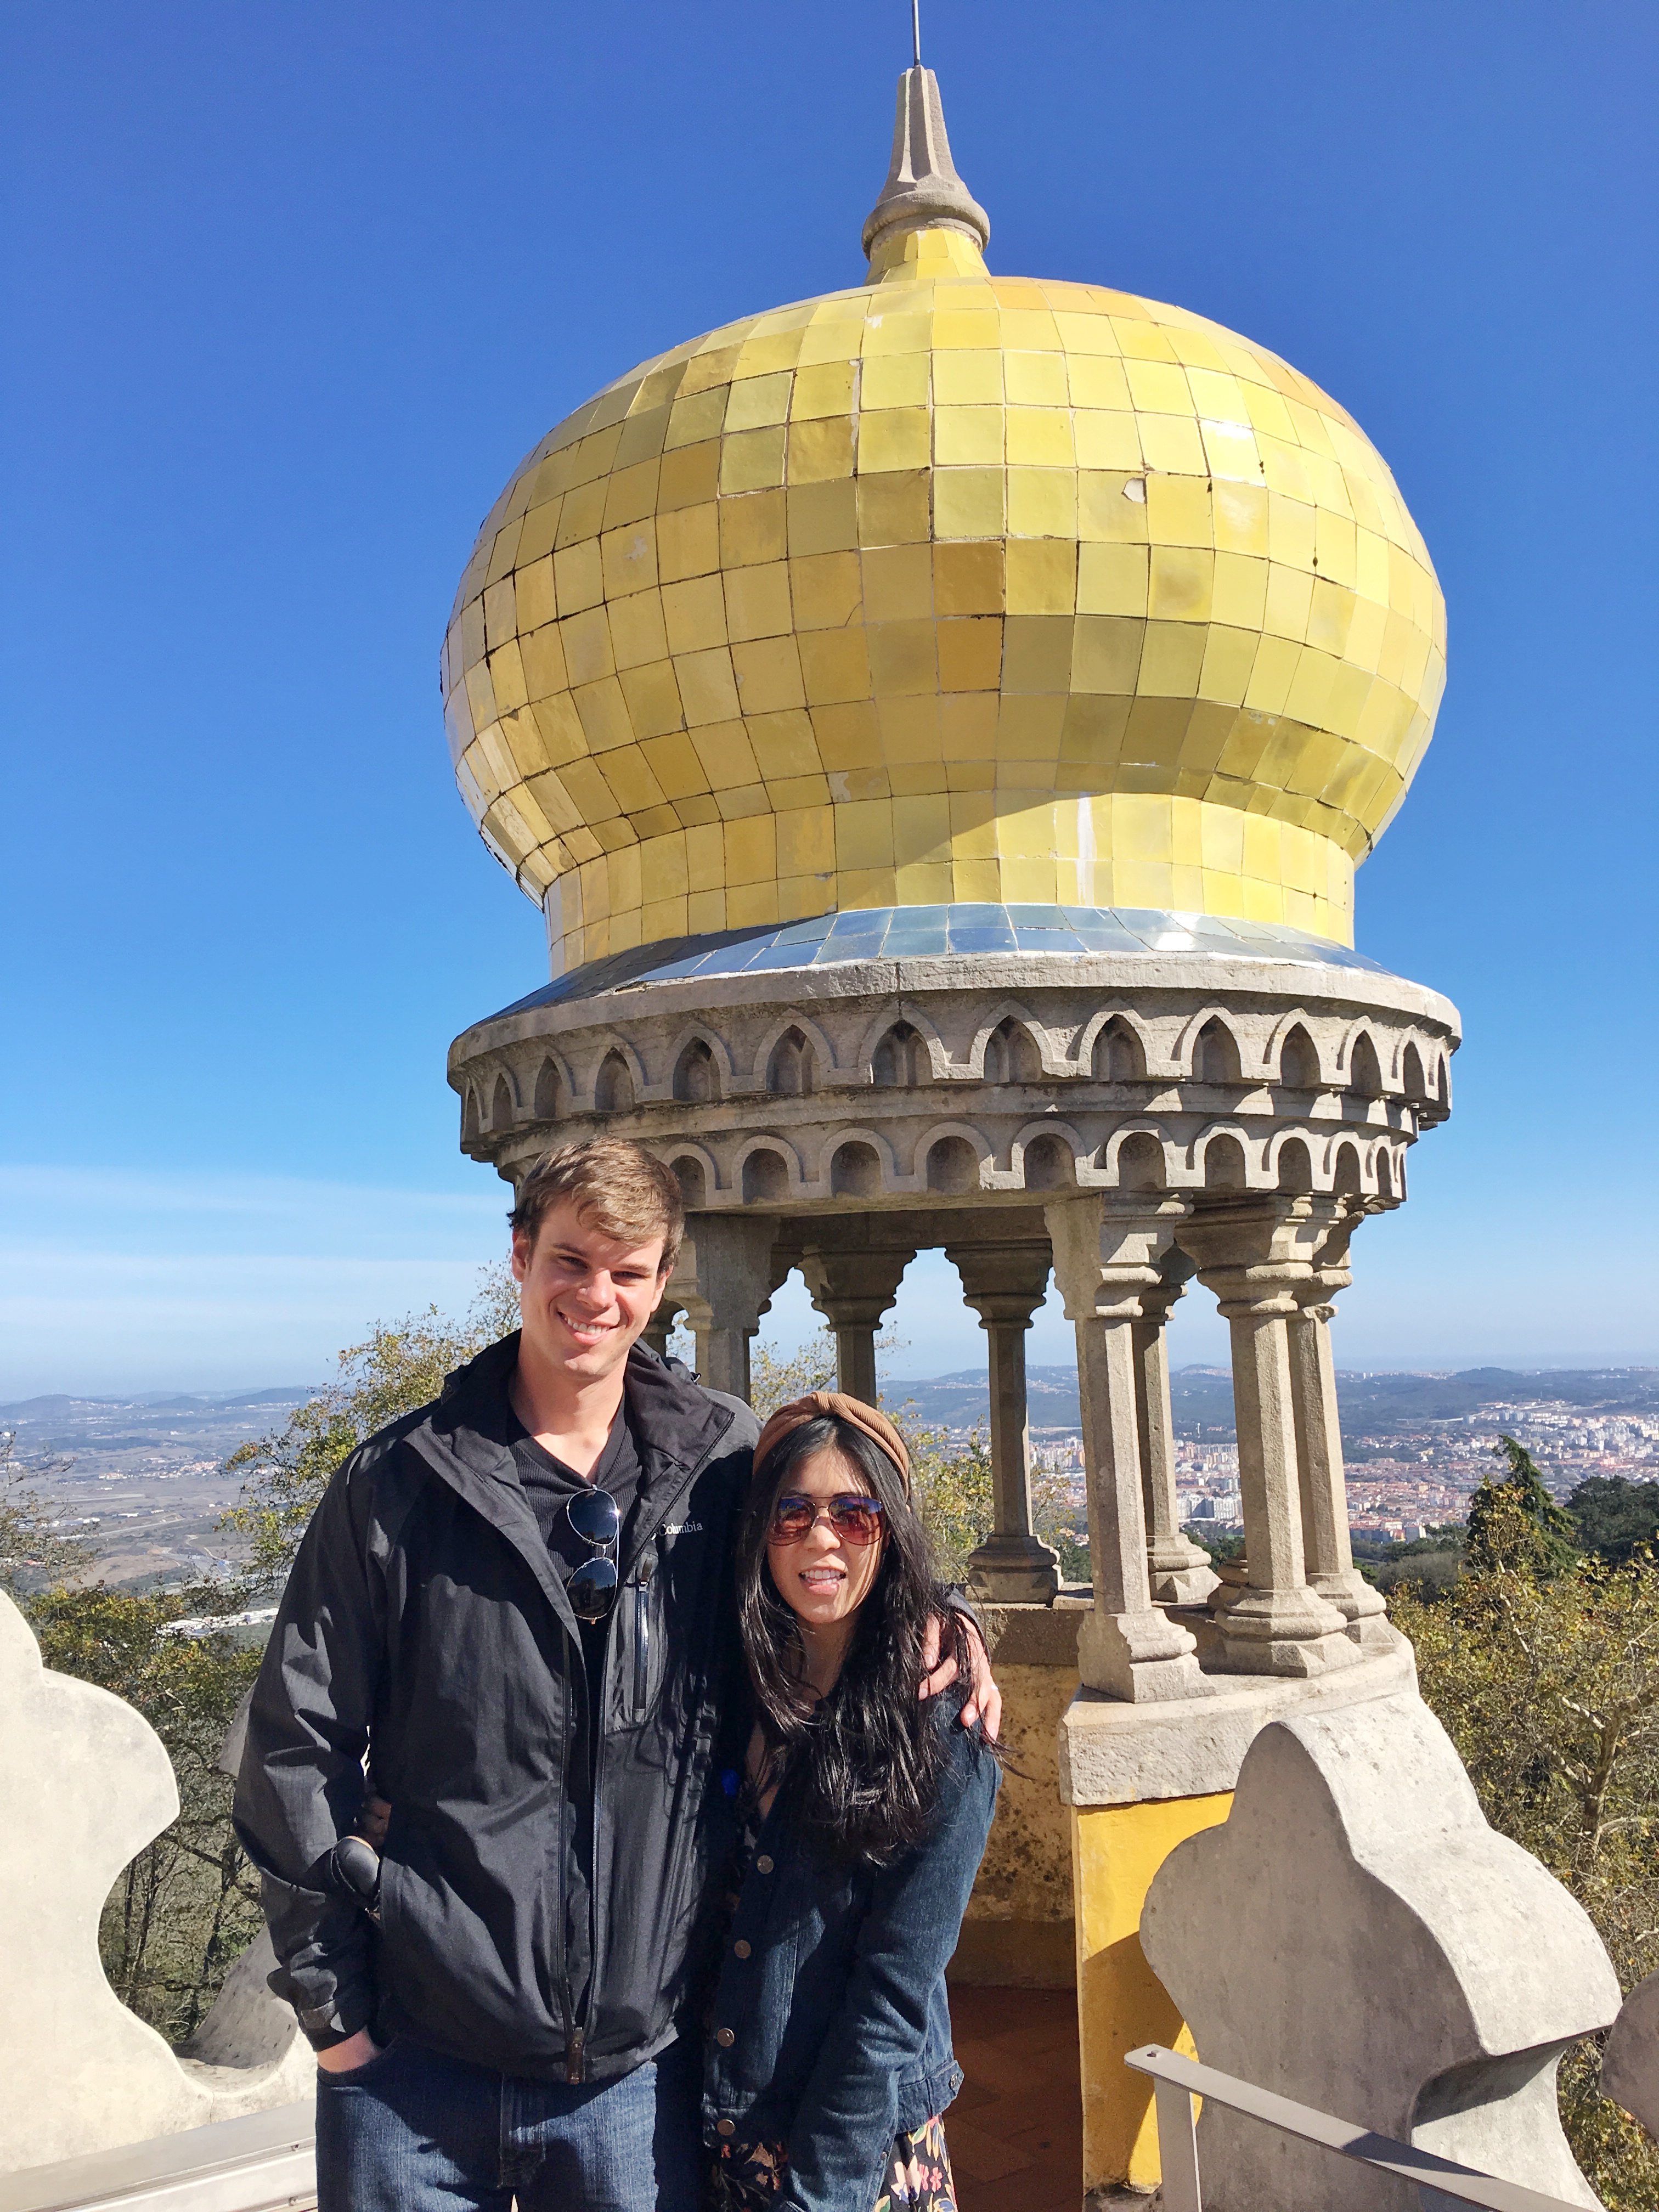 Dome of Pena Palace